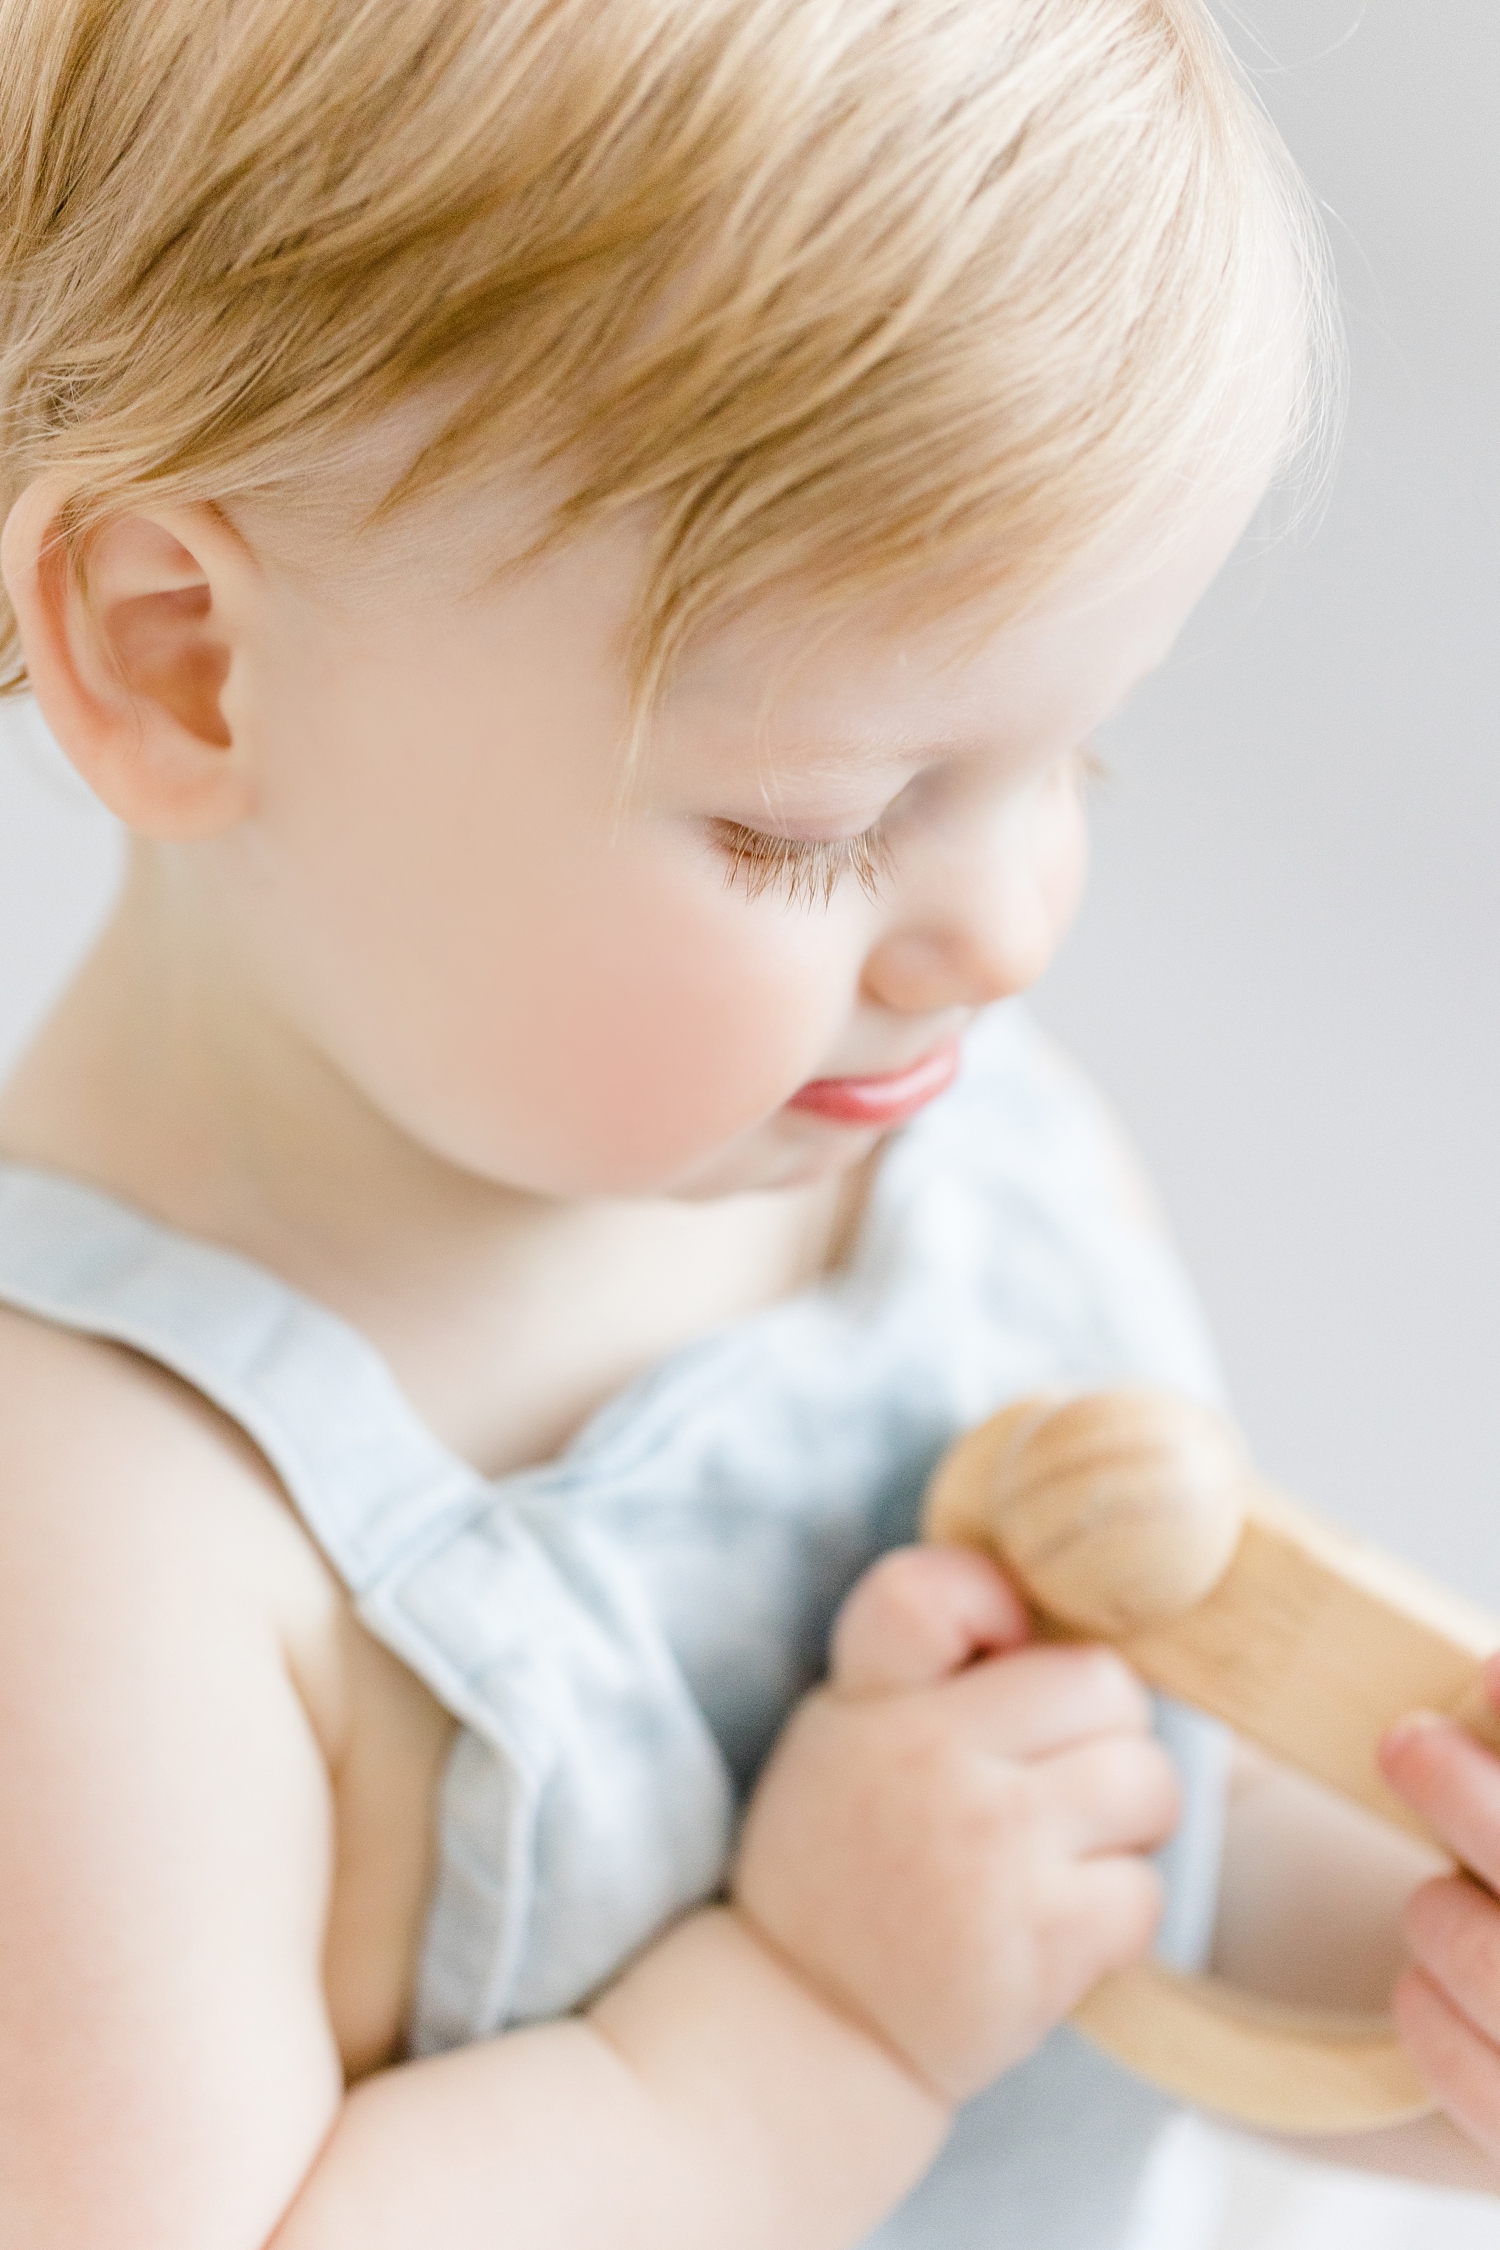 Detail image of Baby Brody's long eyelashes as he looks down at a wooden toy car | CB Studio